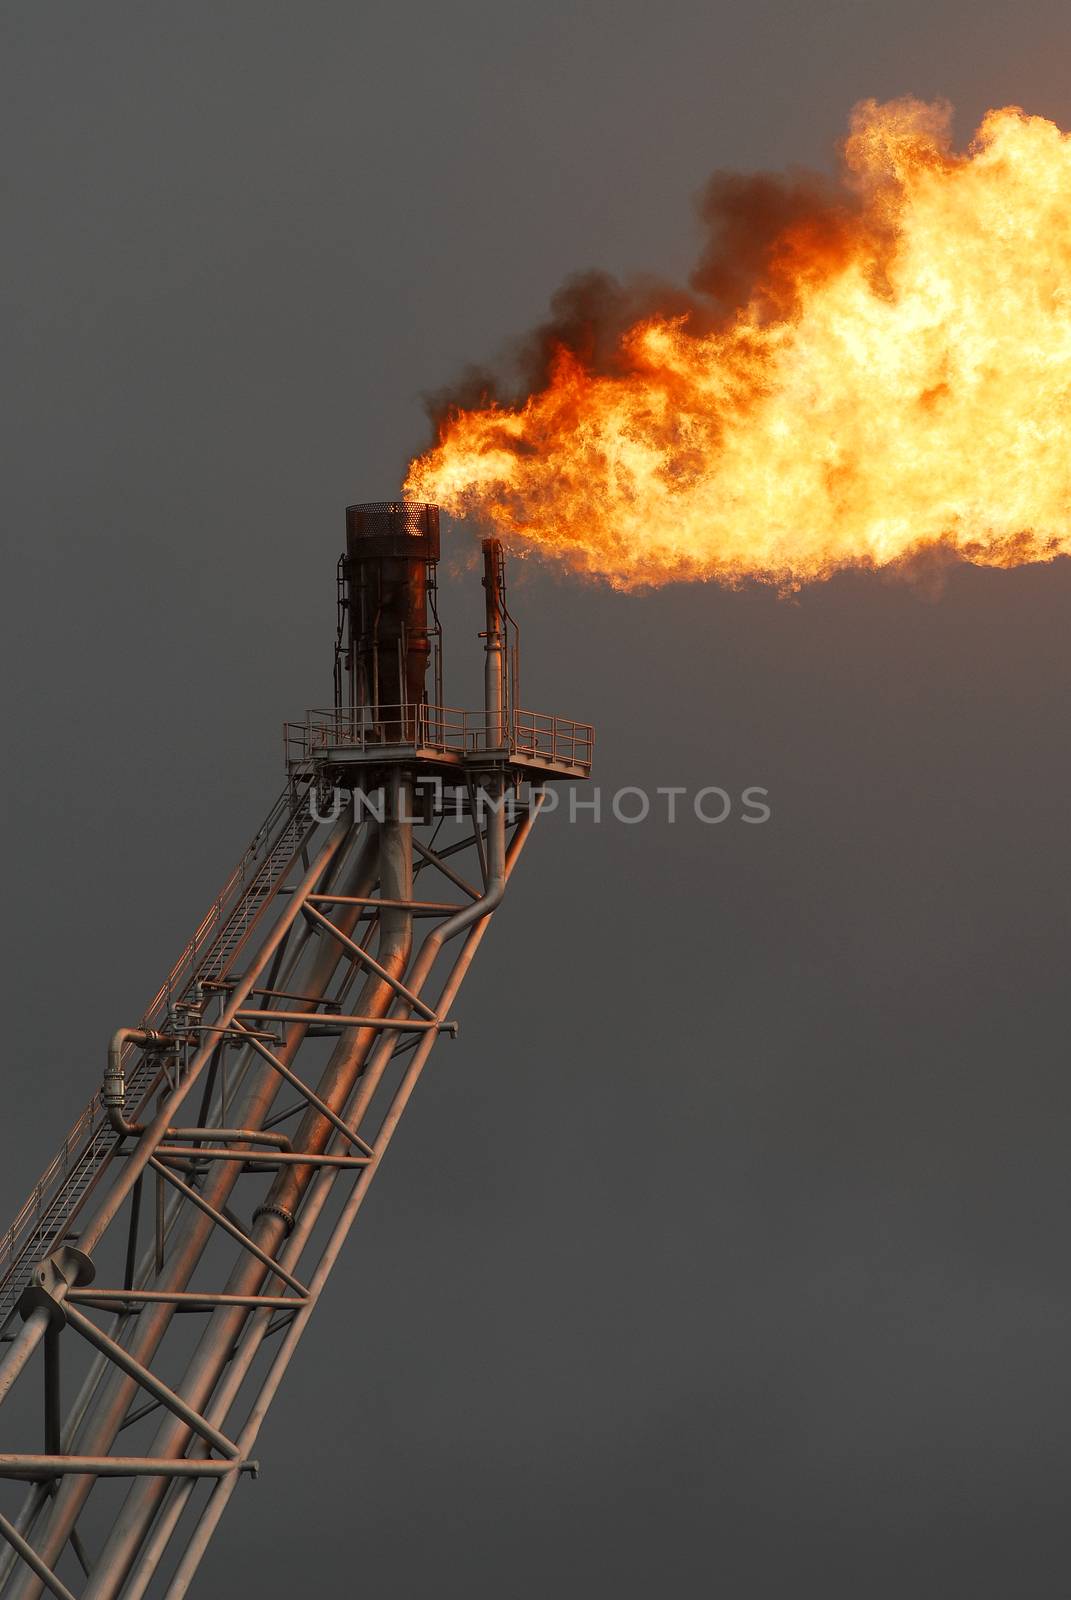 Flare boom nozzle and fire on offshore oil rig